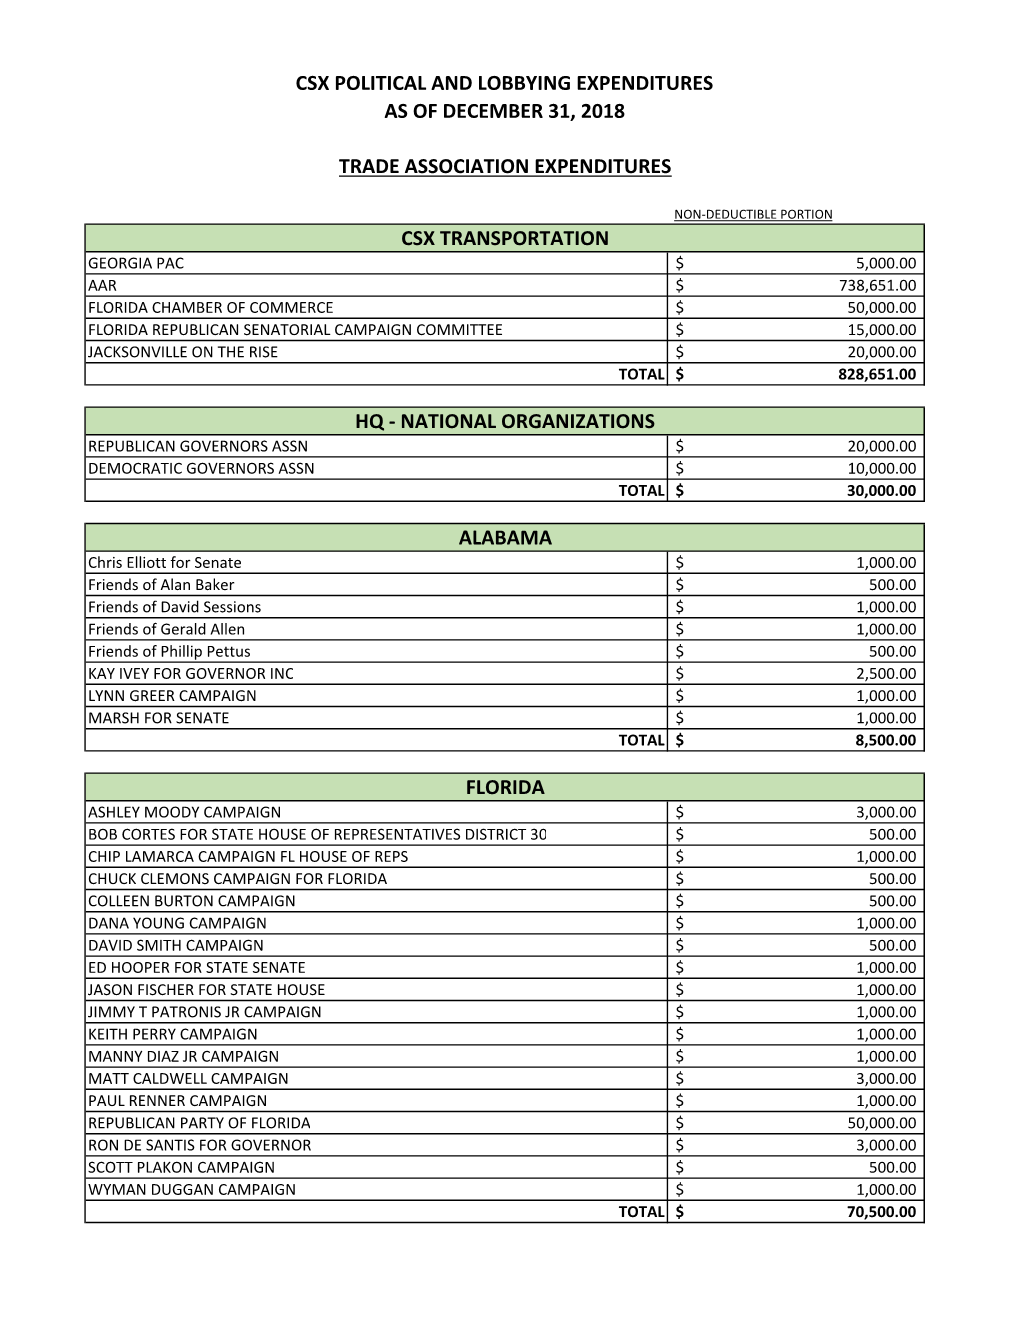 CSX Political and Lobbying Expenditures Summary